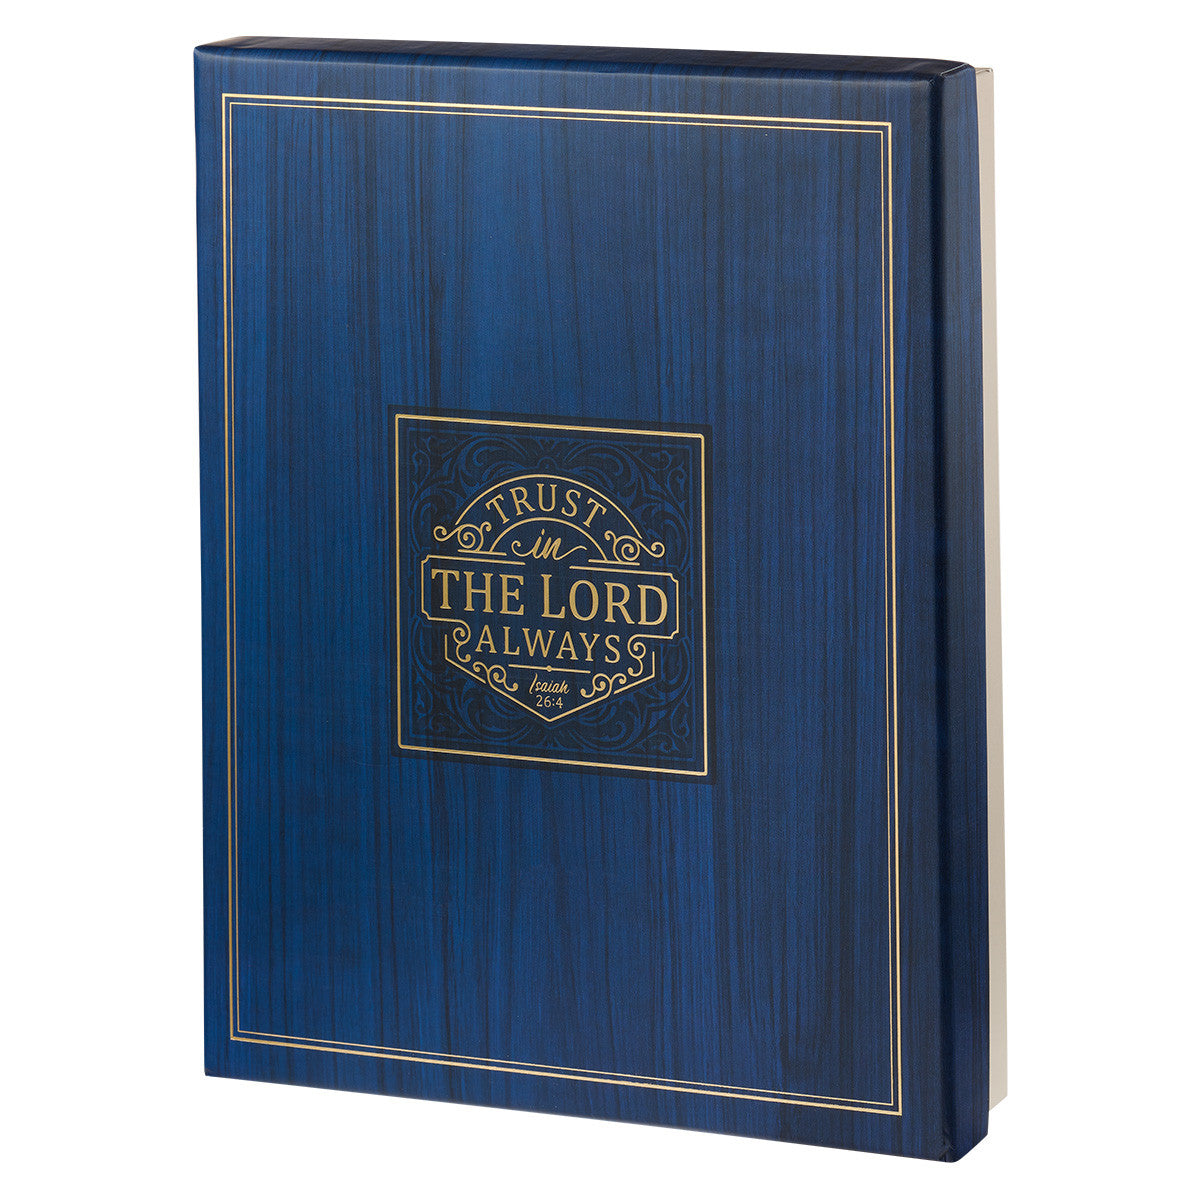 Trust in the LORD Journal and Key Ring Boxed Gift Set - Isaiah 26:4